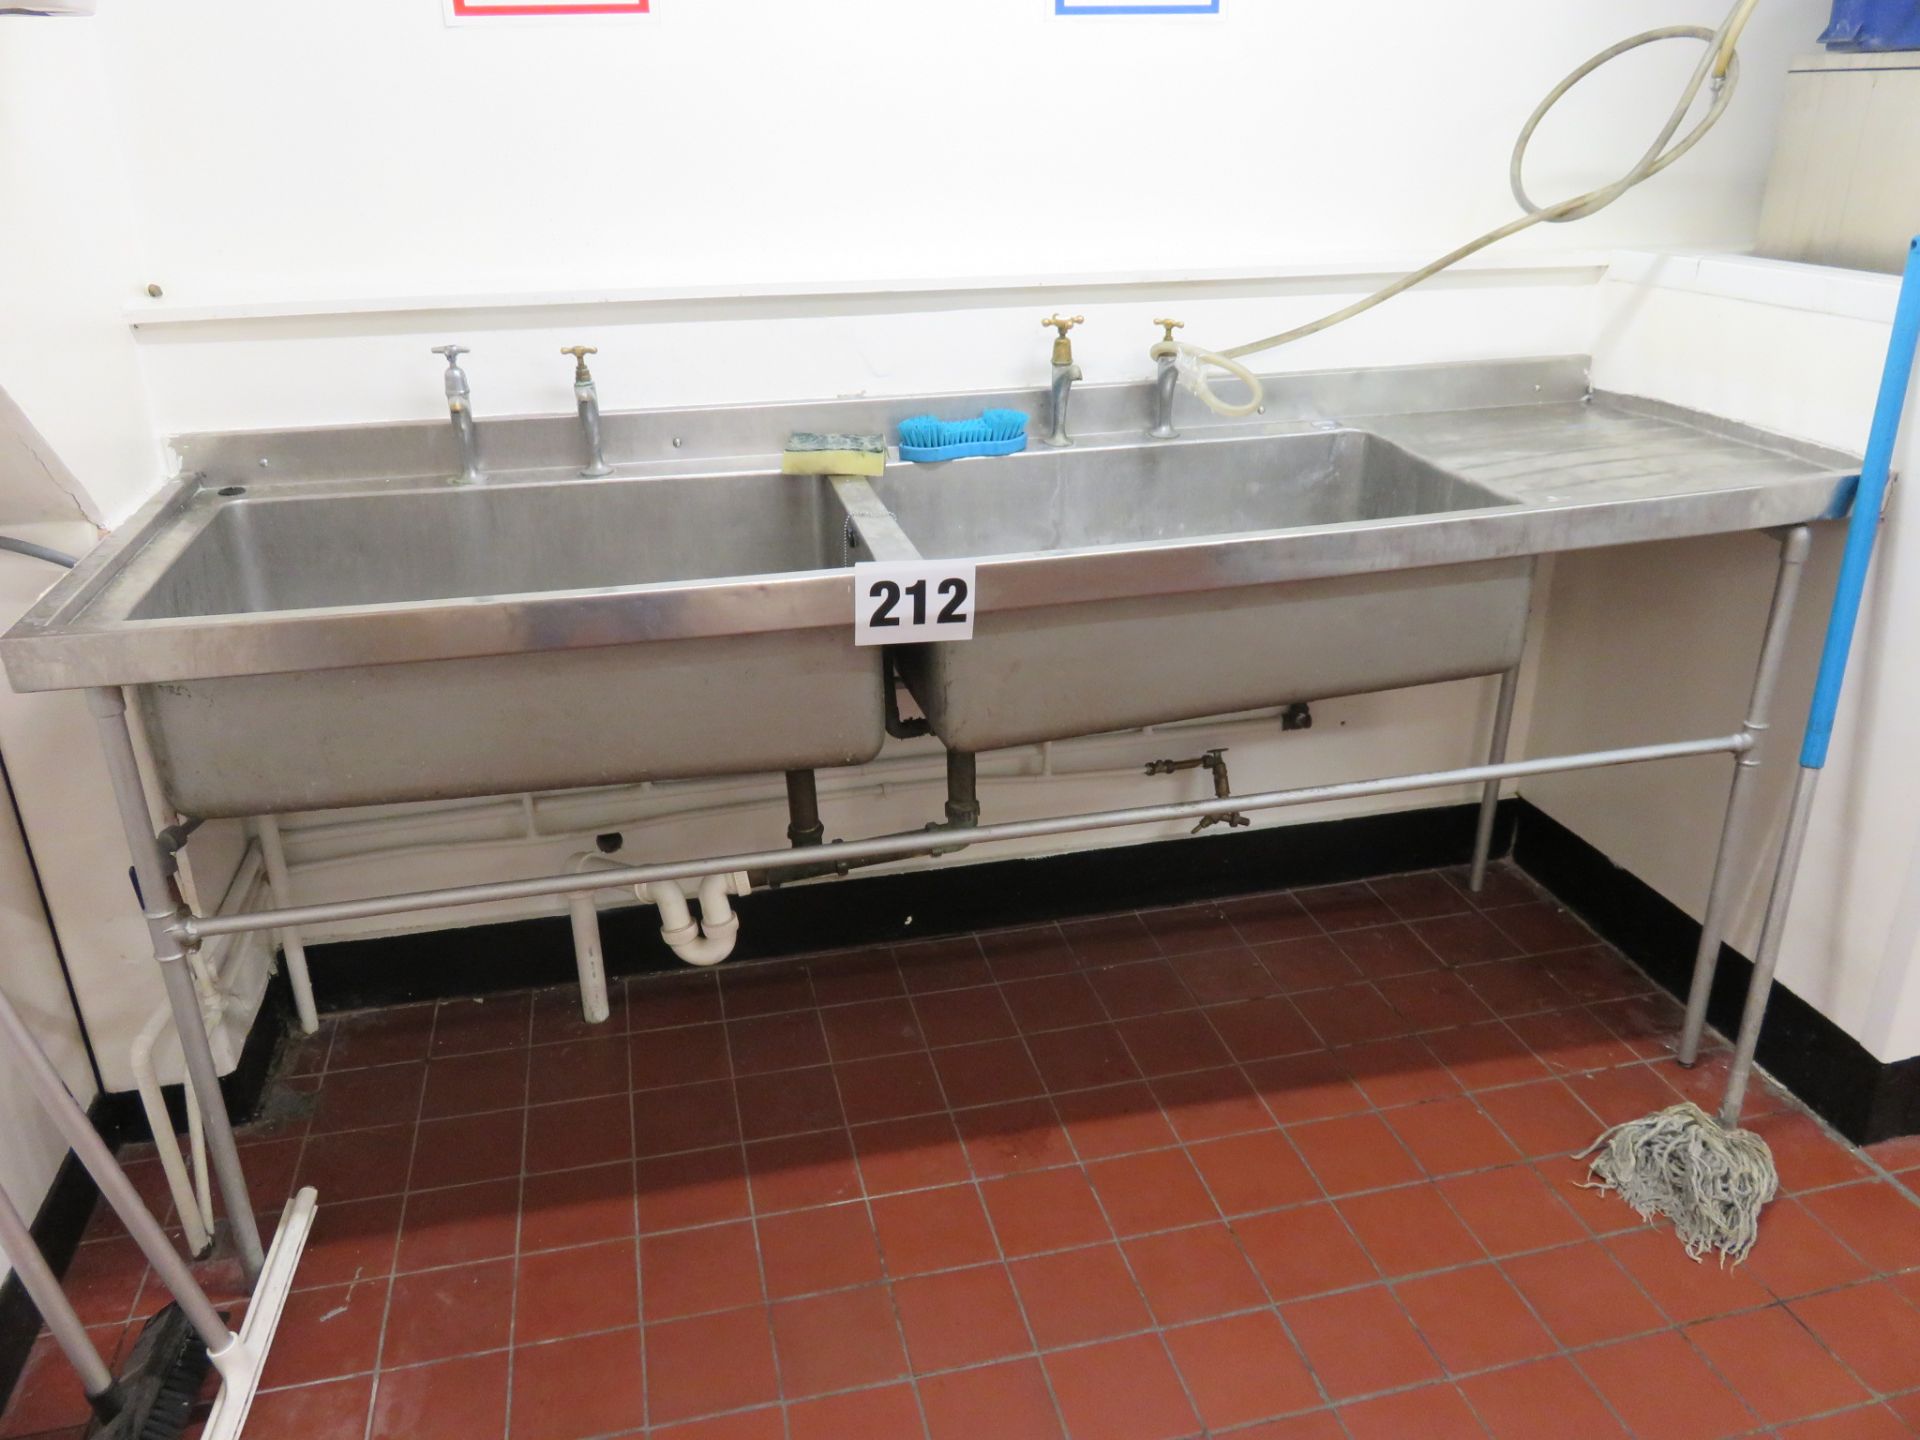 S/s Twin Sink with Taps. Approx. 2300 long x 650mm front to back. Lift Out £30